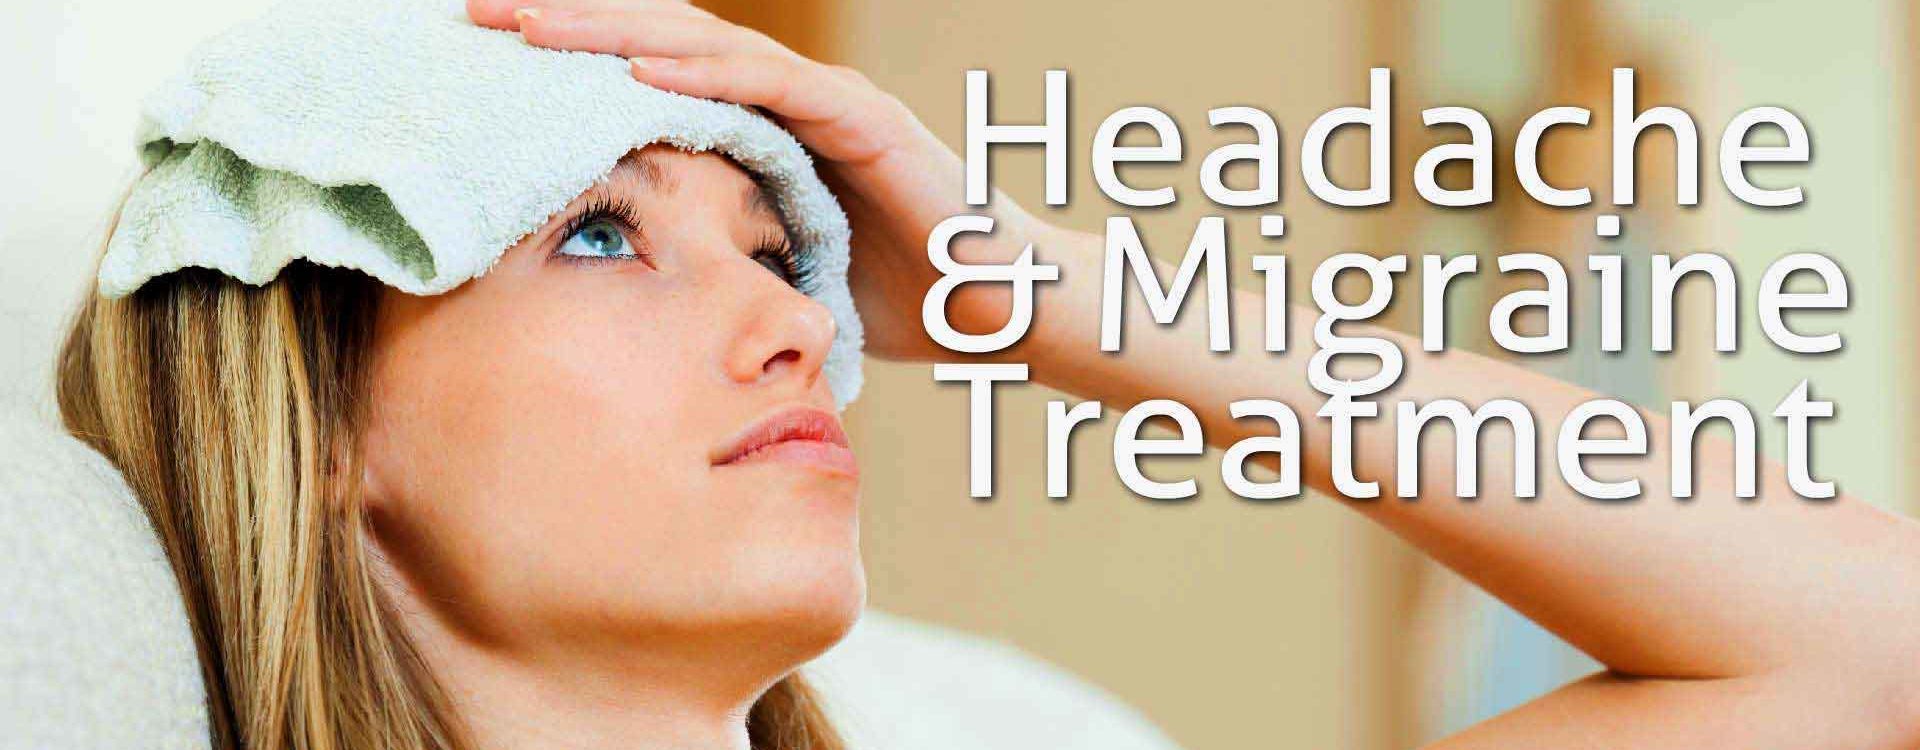 headache doctor in nagpur,best doctor for headache,migraine specialist dr in nagpur ,head specialist doctor in nagpur,migraine treatment in nagpur